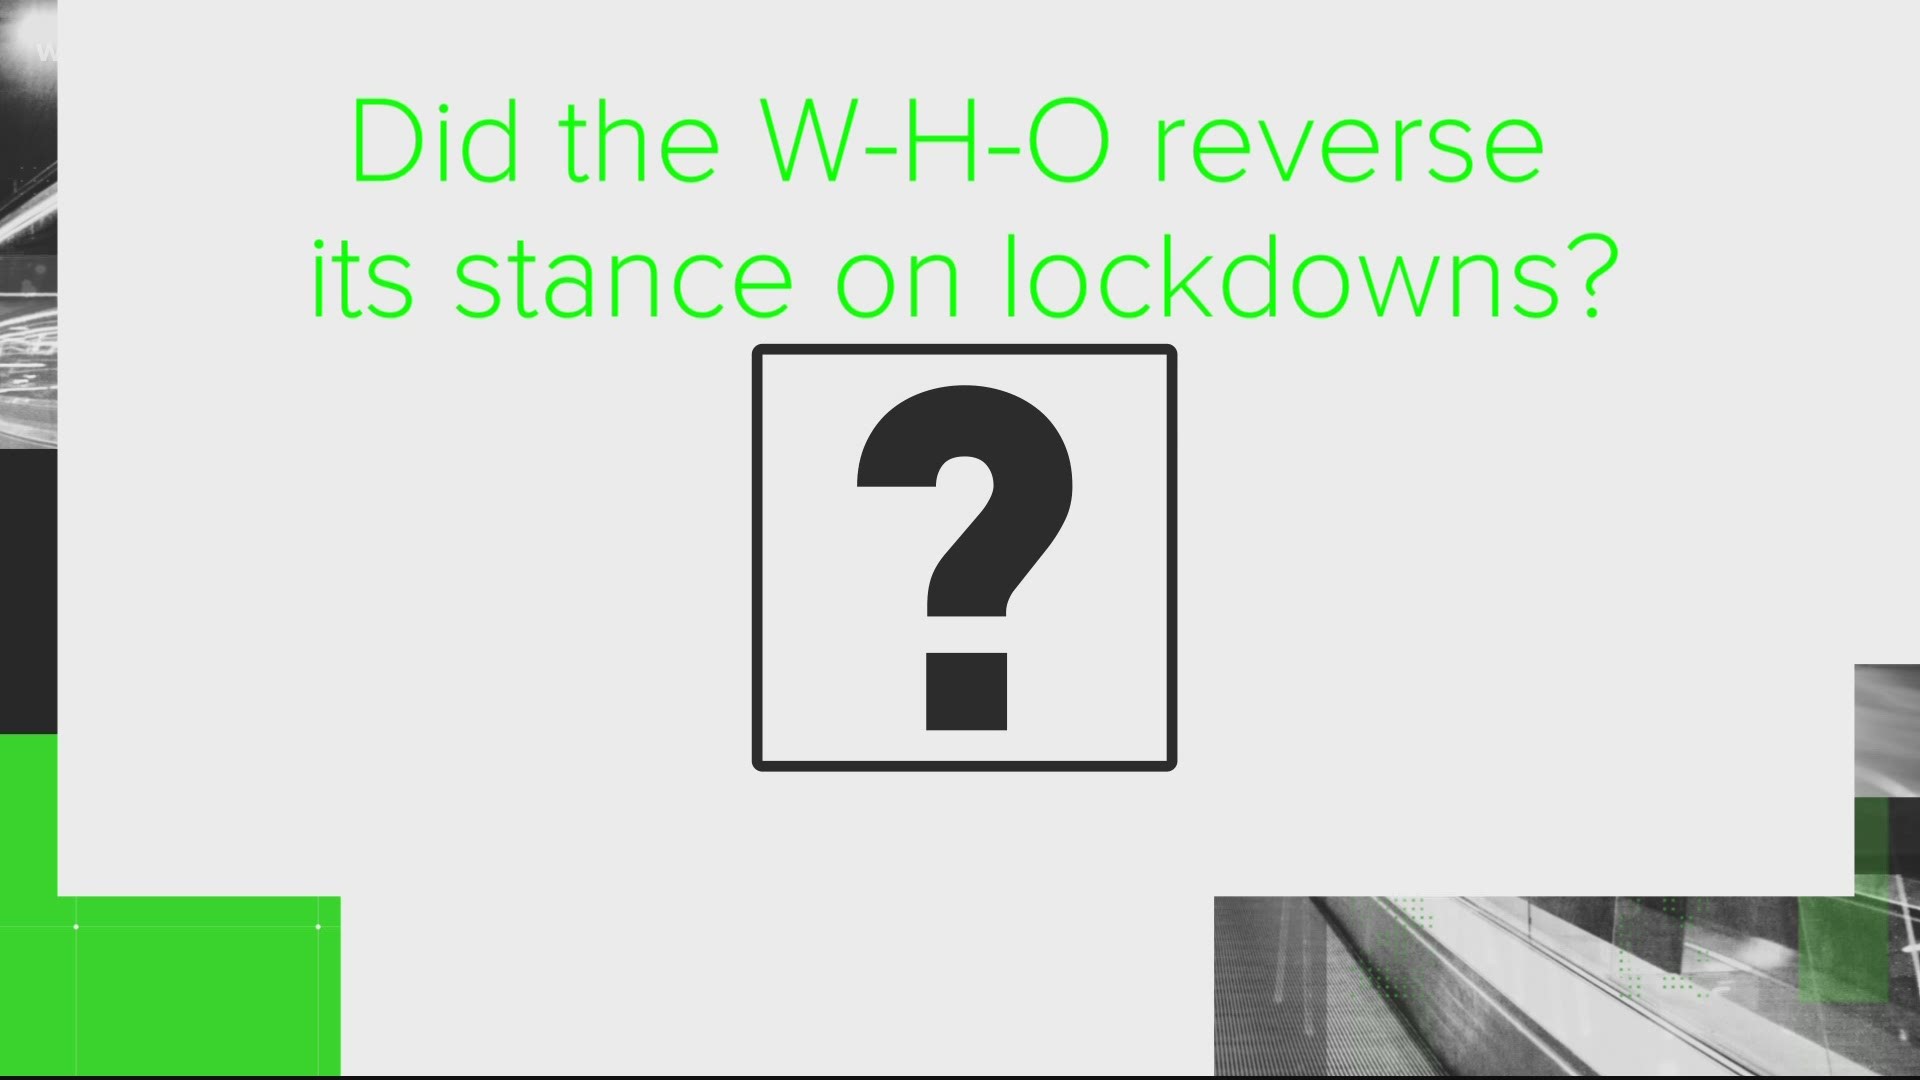 The World Health Organization refuted President Trump's claim that they changed their stance on lockdowns.